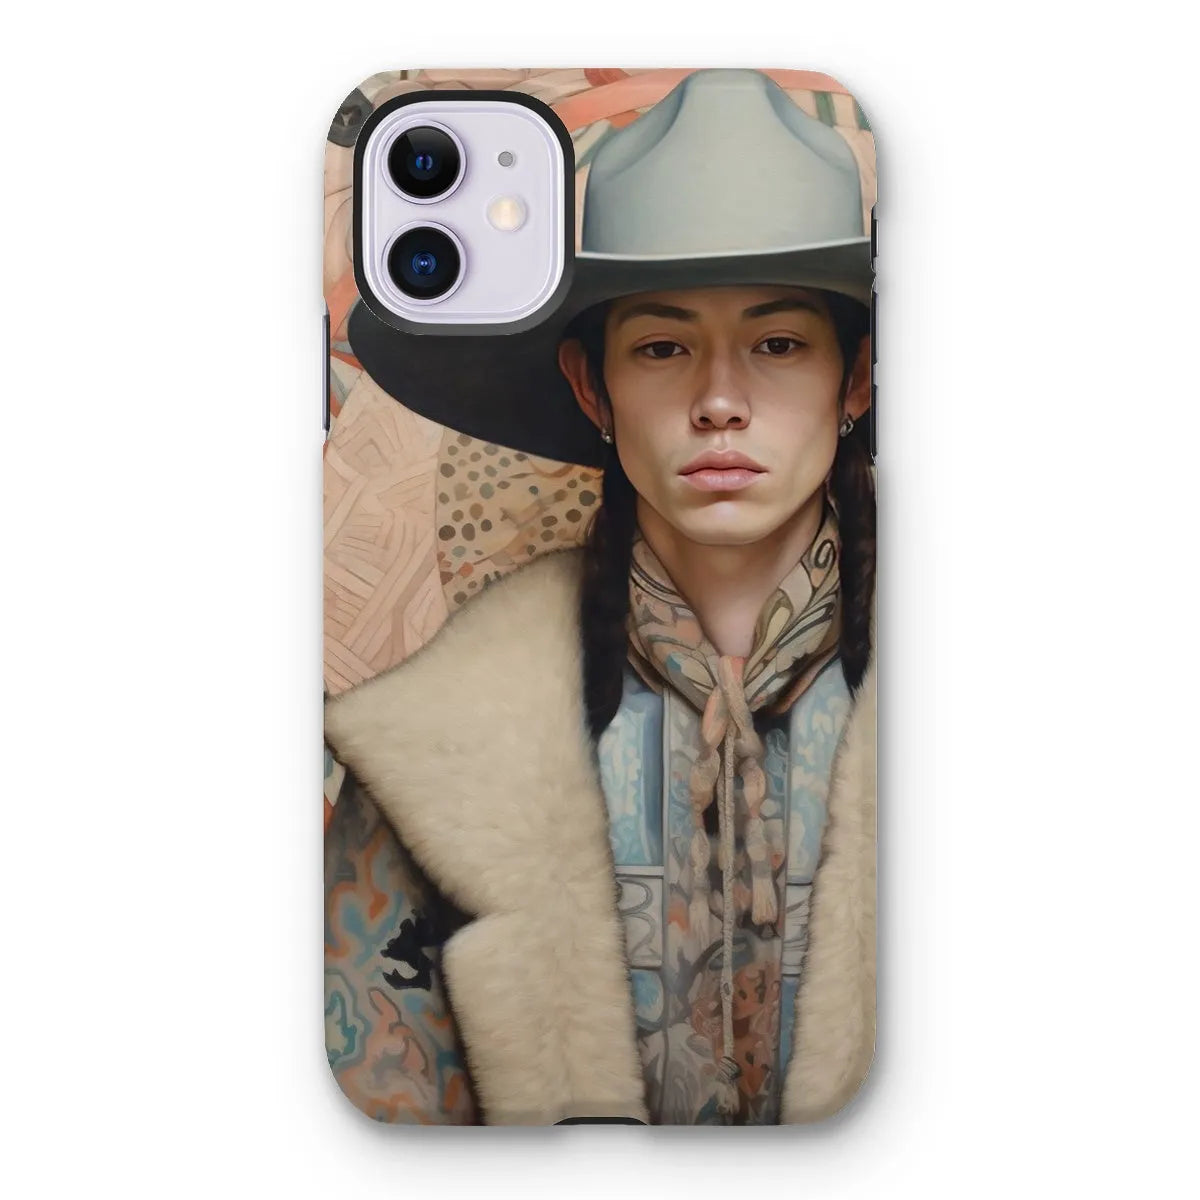 Jacy The Gay Cowboy - Dandy Gay Aesthetic Art Phone Case - Iphone 11 / Matte - Mobile Phone Cases - Aesthetic Art